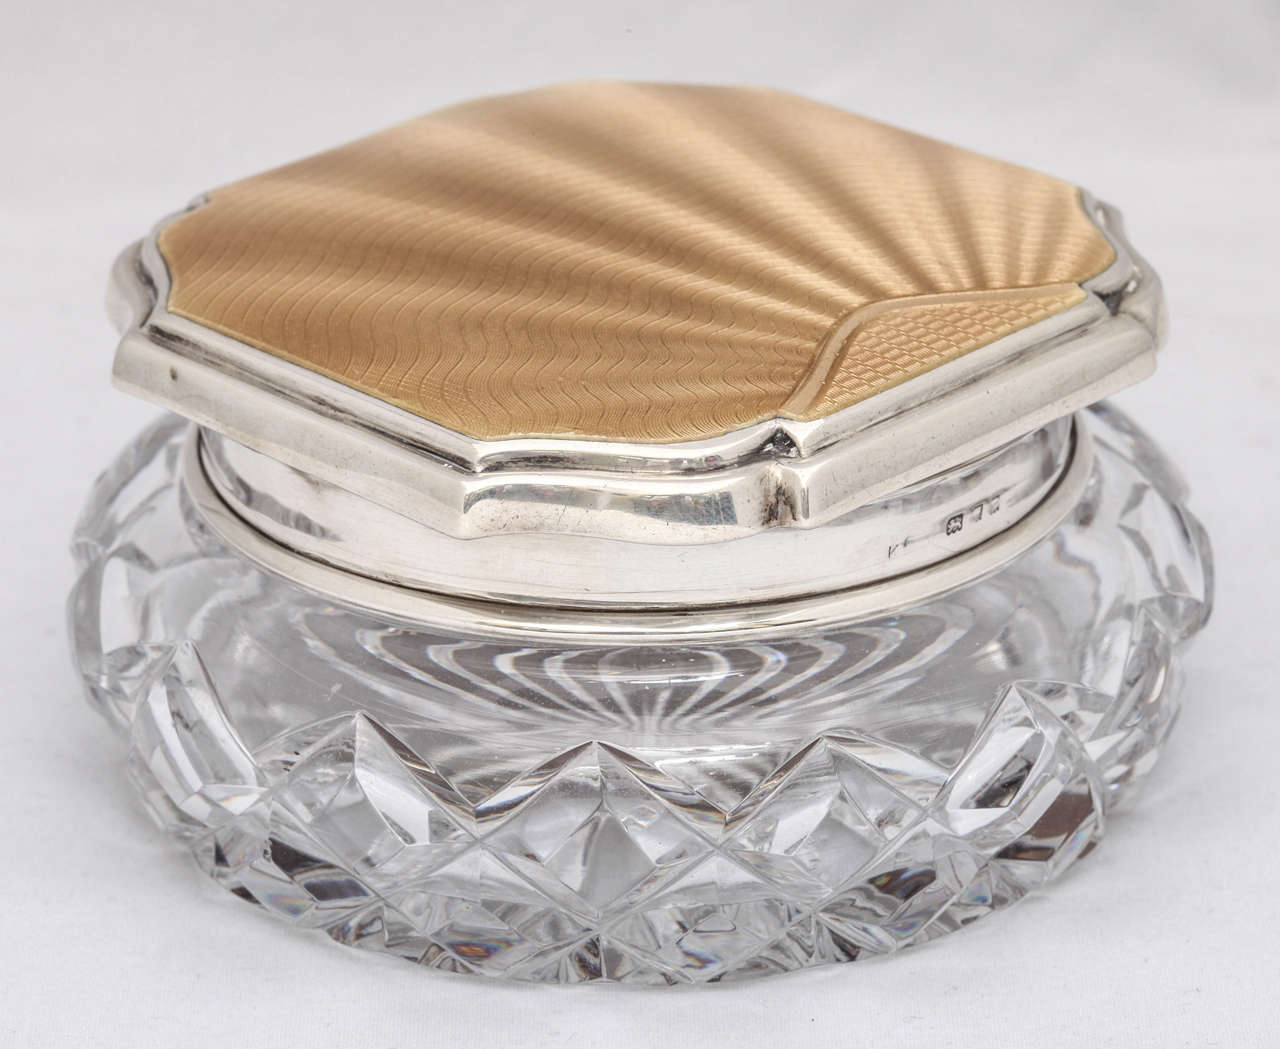 Beautiful Art Deco, sterling silver and champagne colored guilloche enamel - mounted crystal powder jar, London, 1934. @2 1/2